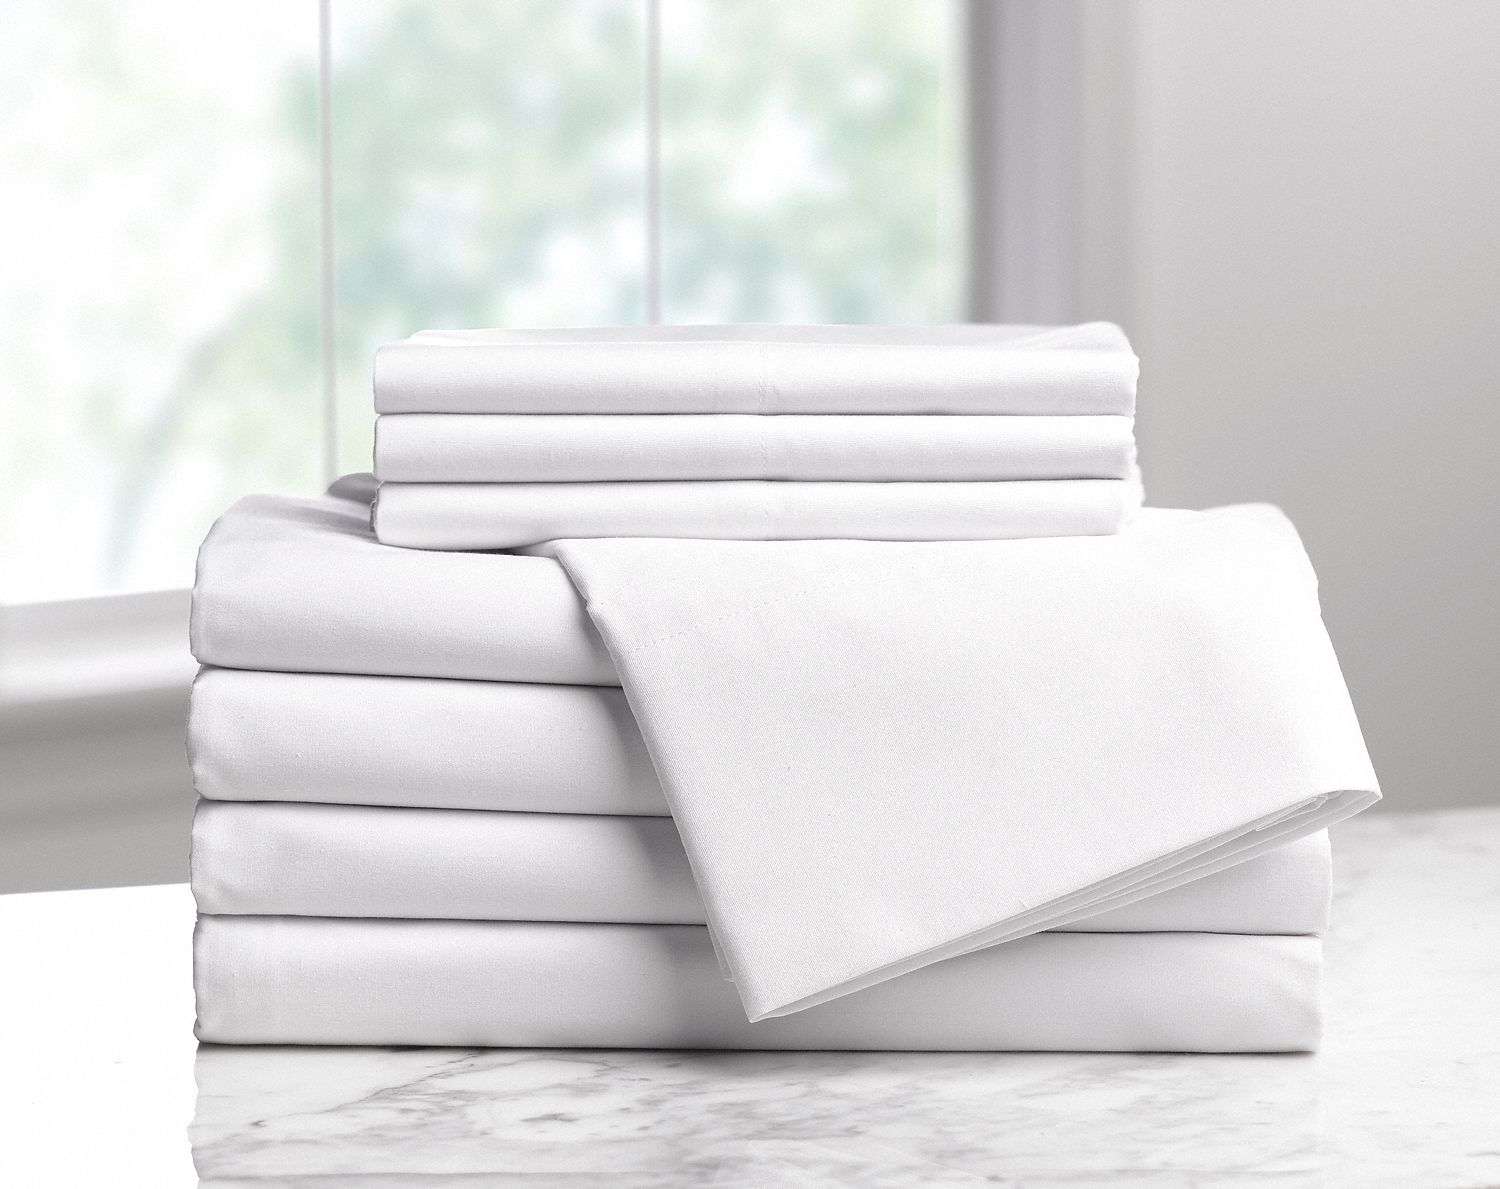 Flat Sheet: Flat, Queen, 93 in Wd, 110 in Lg, 60% Cotton/40% Polyester Fabric, T200, 6 PK